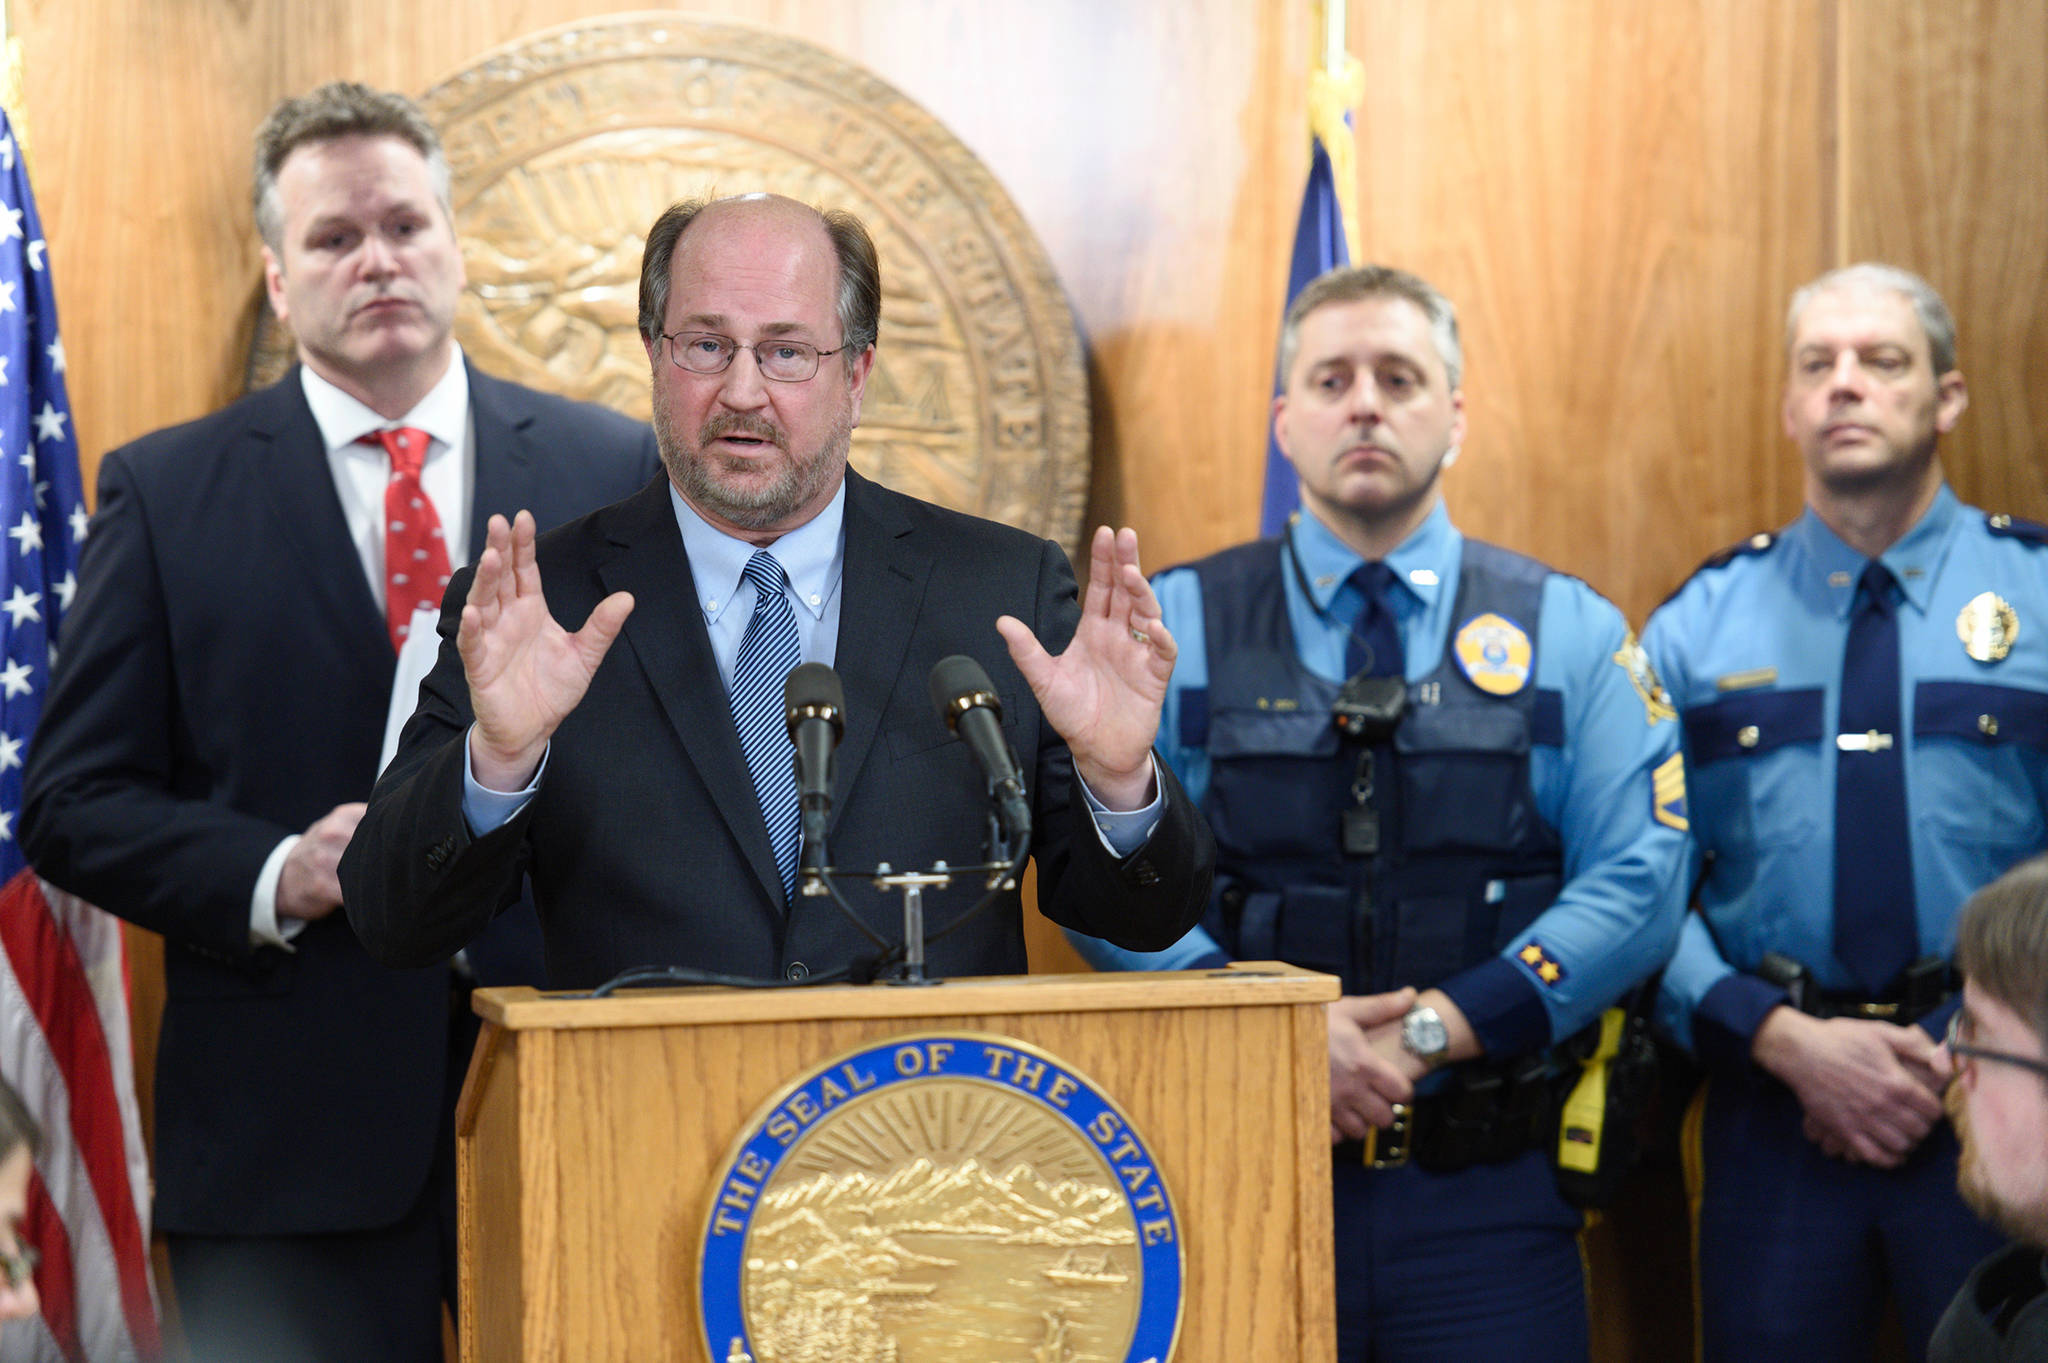 In this file photo, Alaska Attorney General Kevin Clarkson describes four new crimes bills at a press conference with Gov. Mike Dunleavy, left, and Alaska State Troopers at the Capitol on Wednesday, Jan. 23, 2019. (Michael Penn | Juneau Empire File)